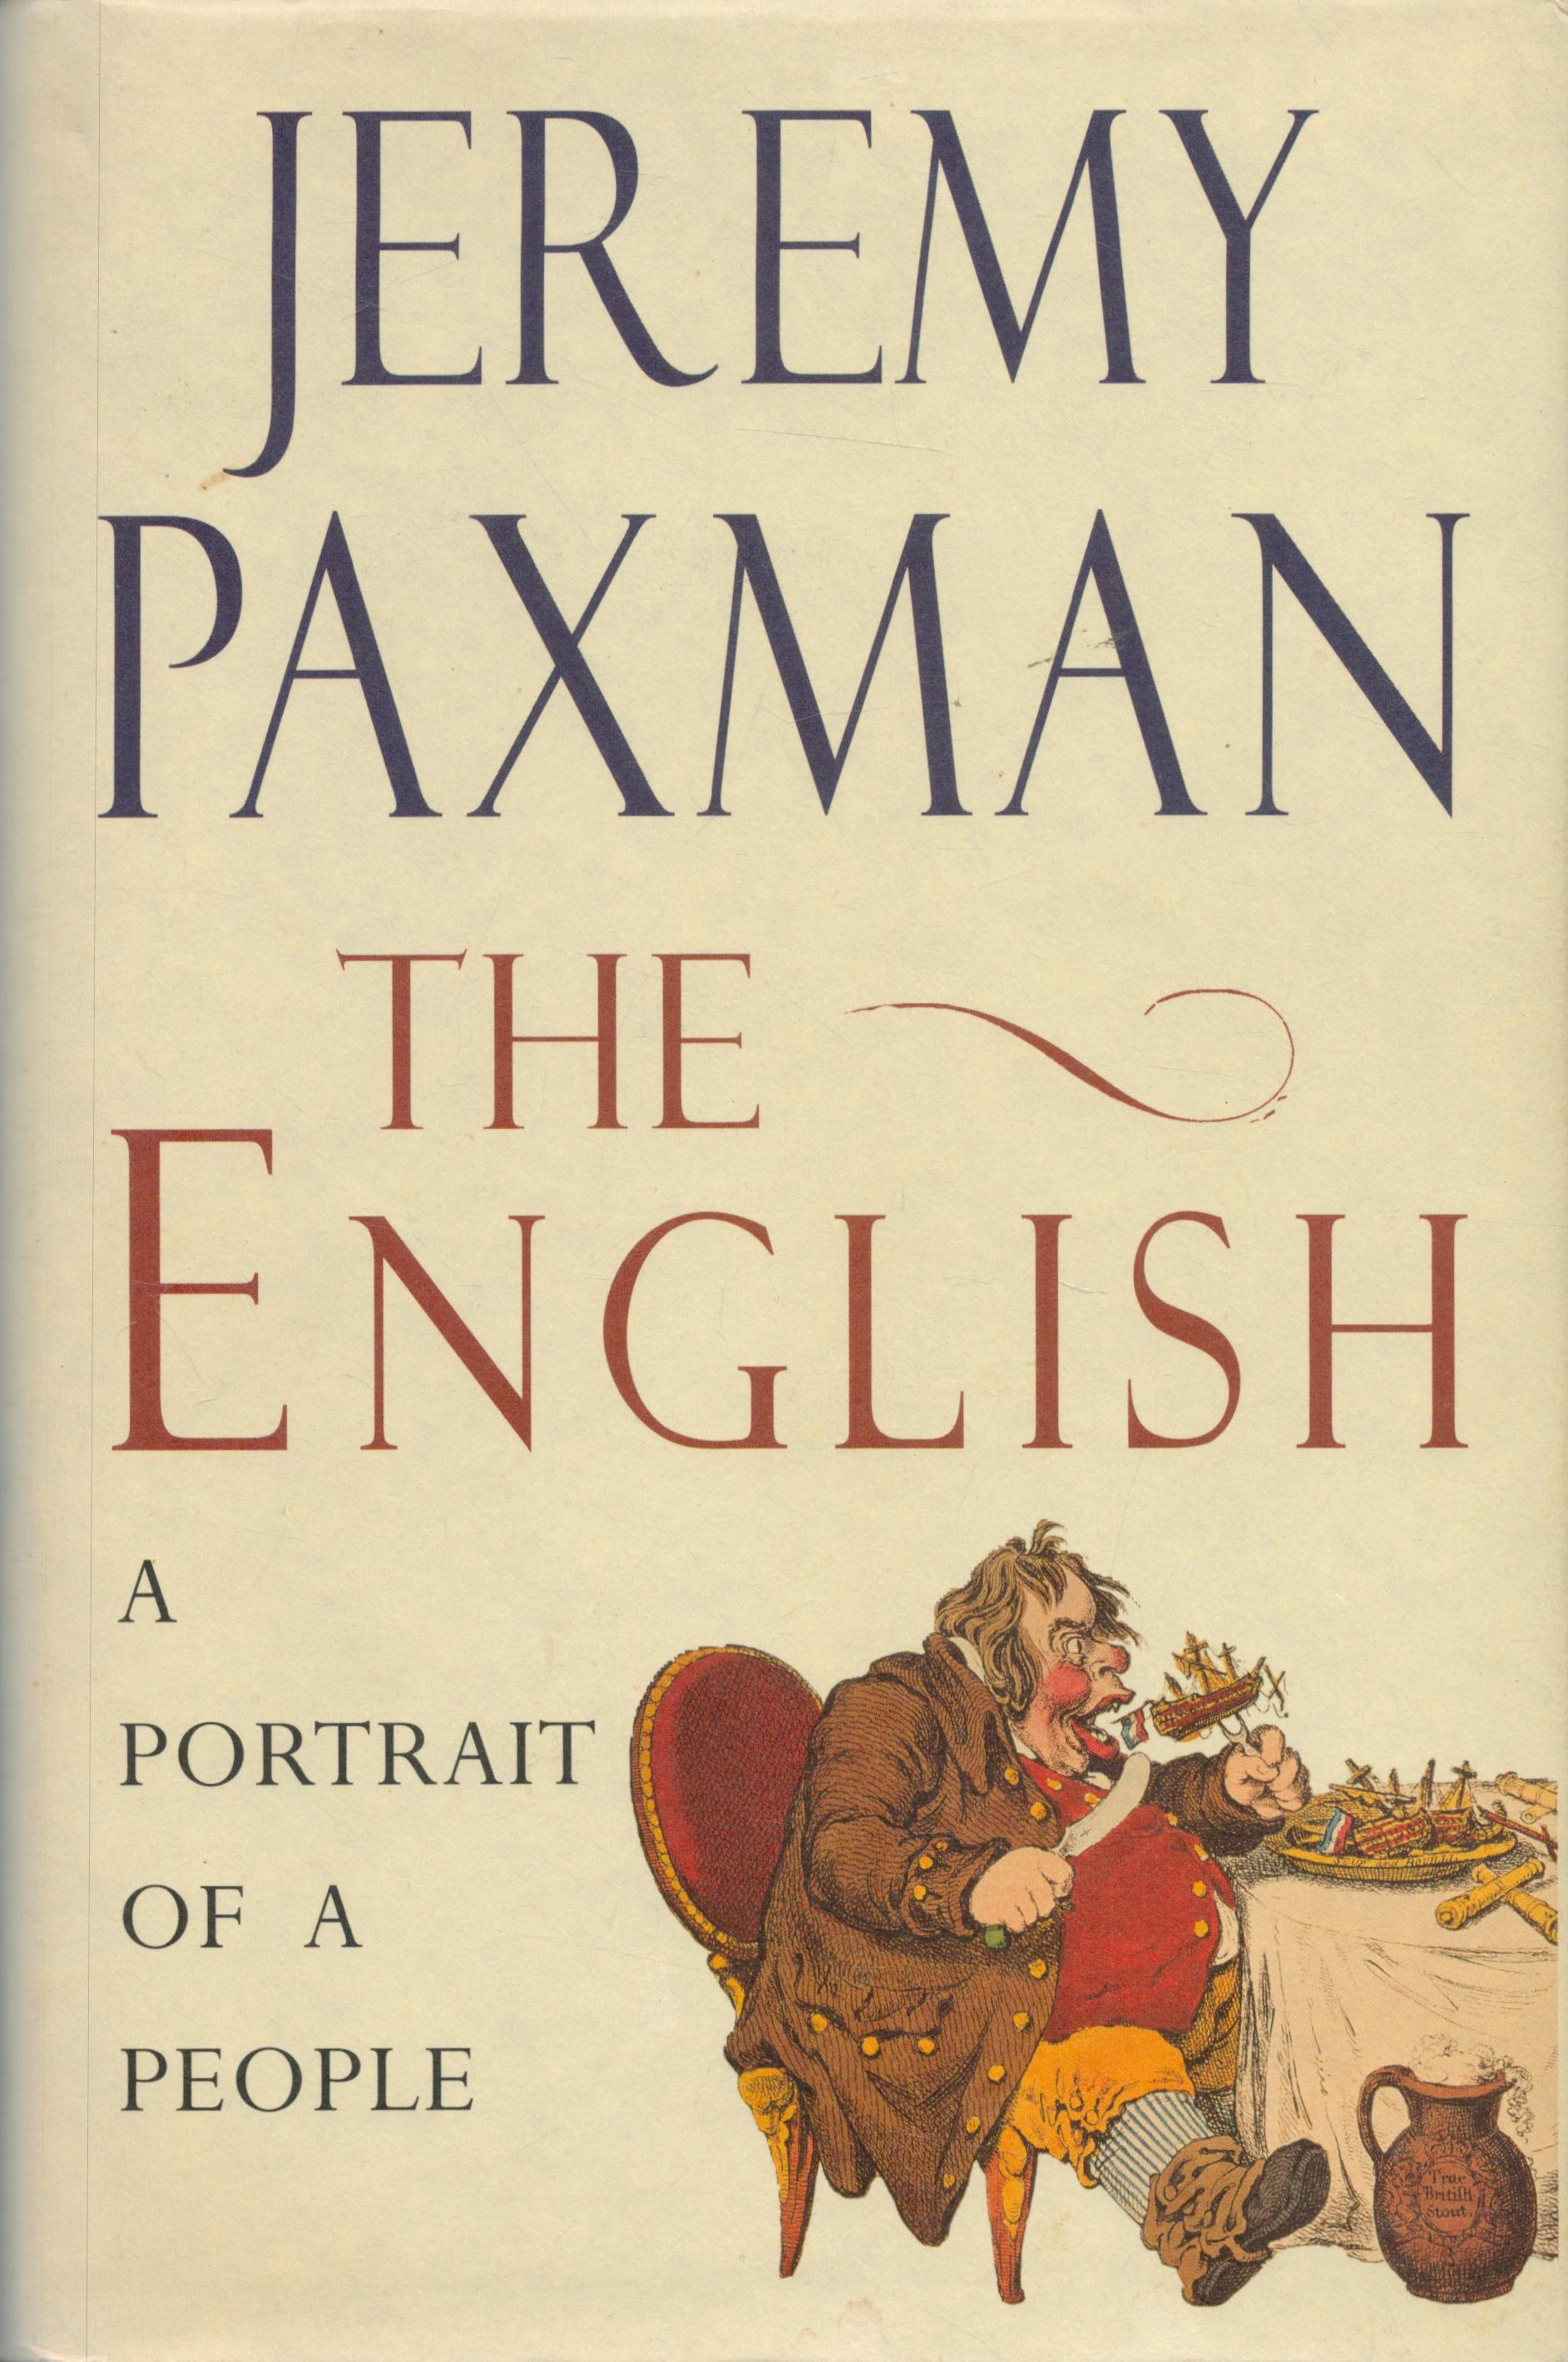 Jeremy Paxman Hardback Book The English A Portrait of People signed by the Author on the Title Page.